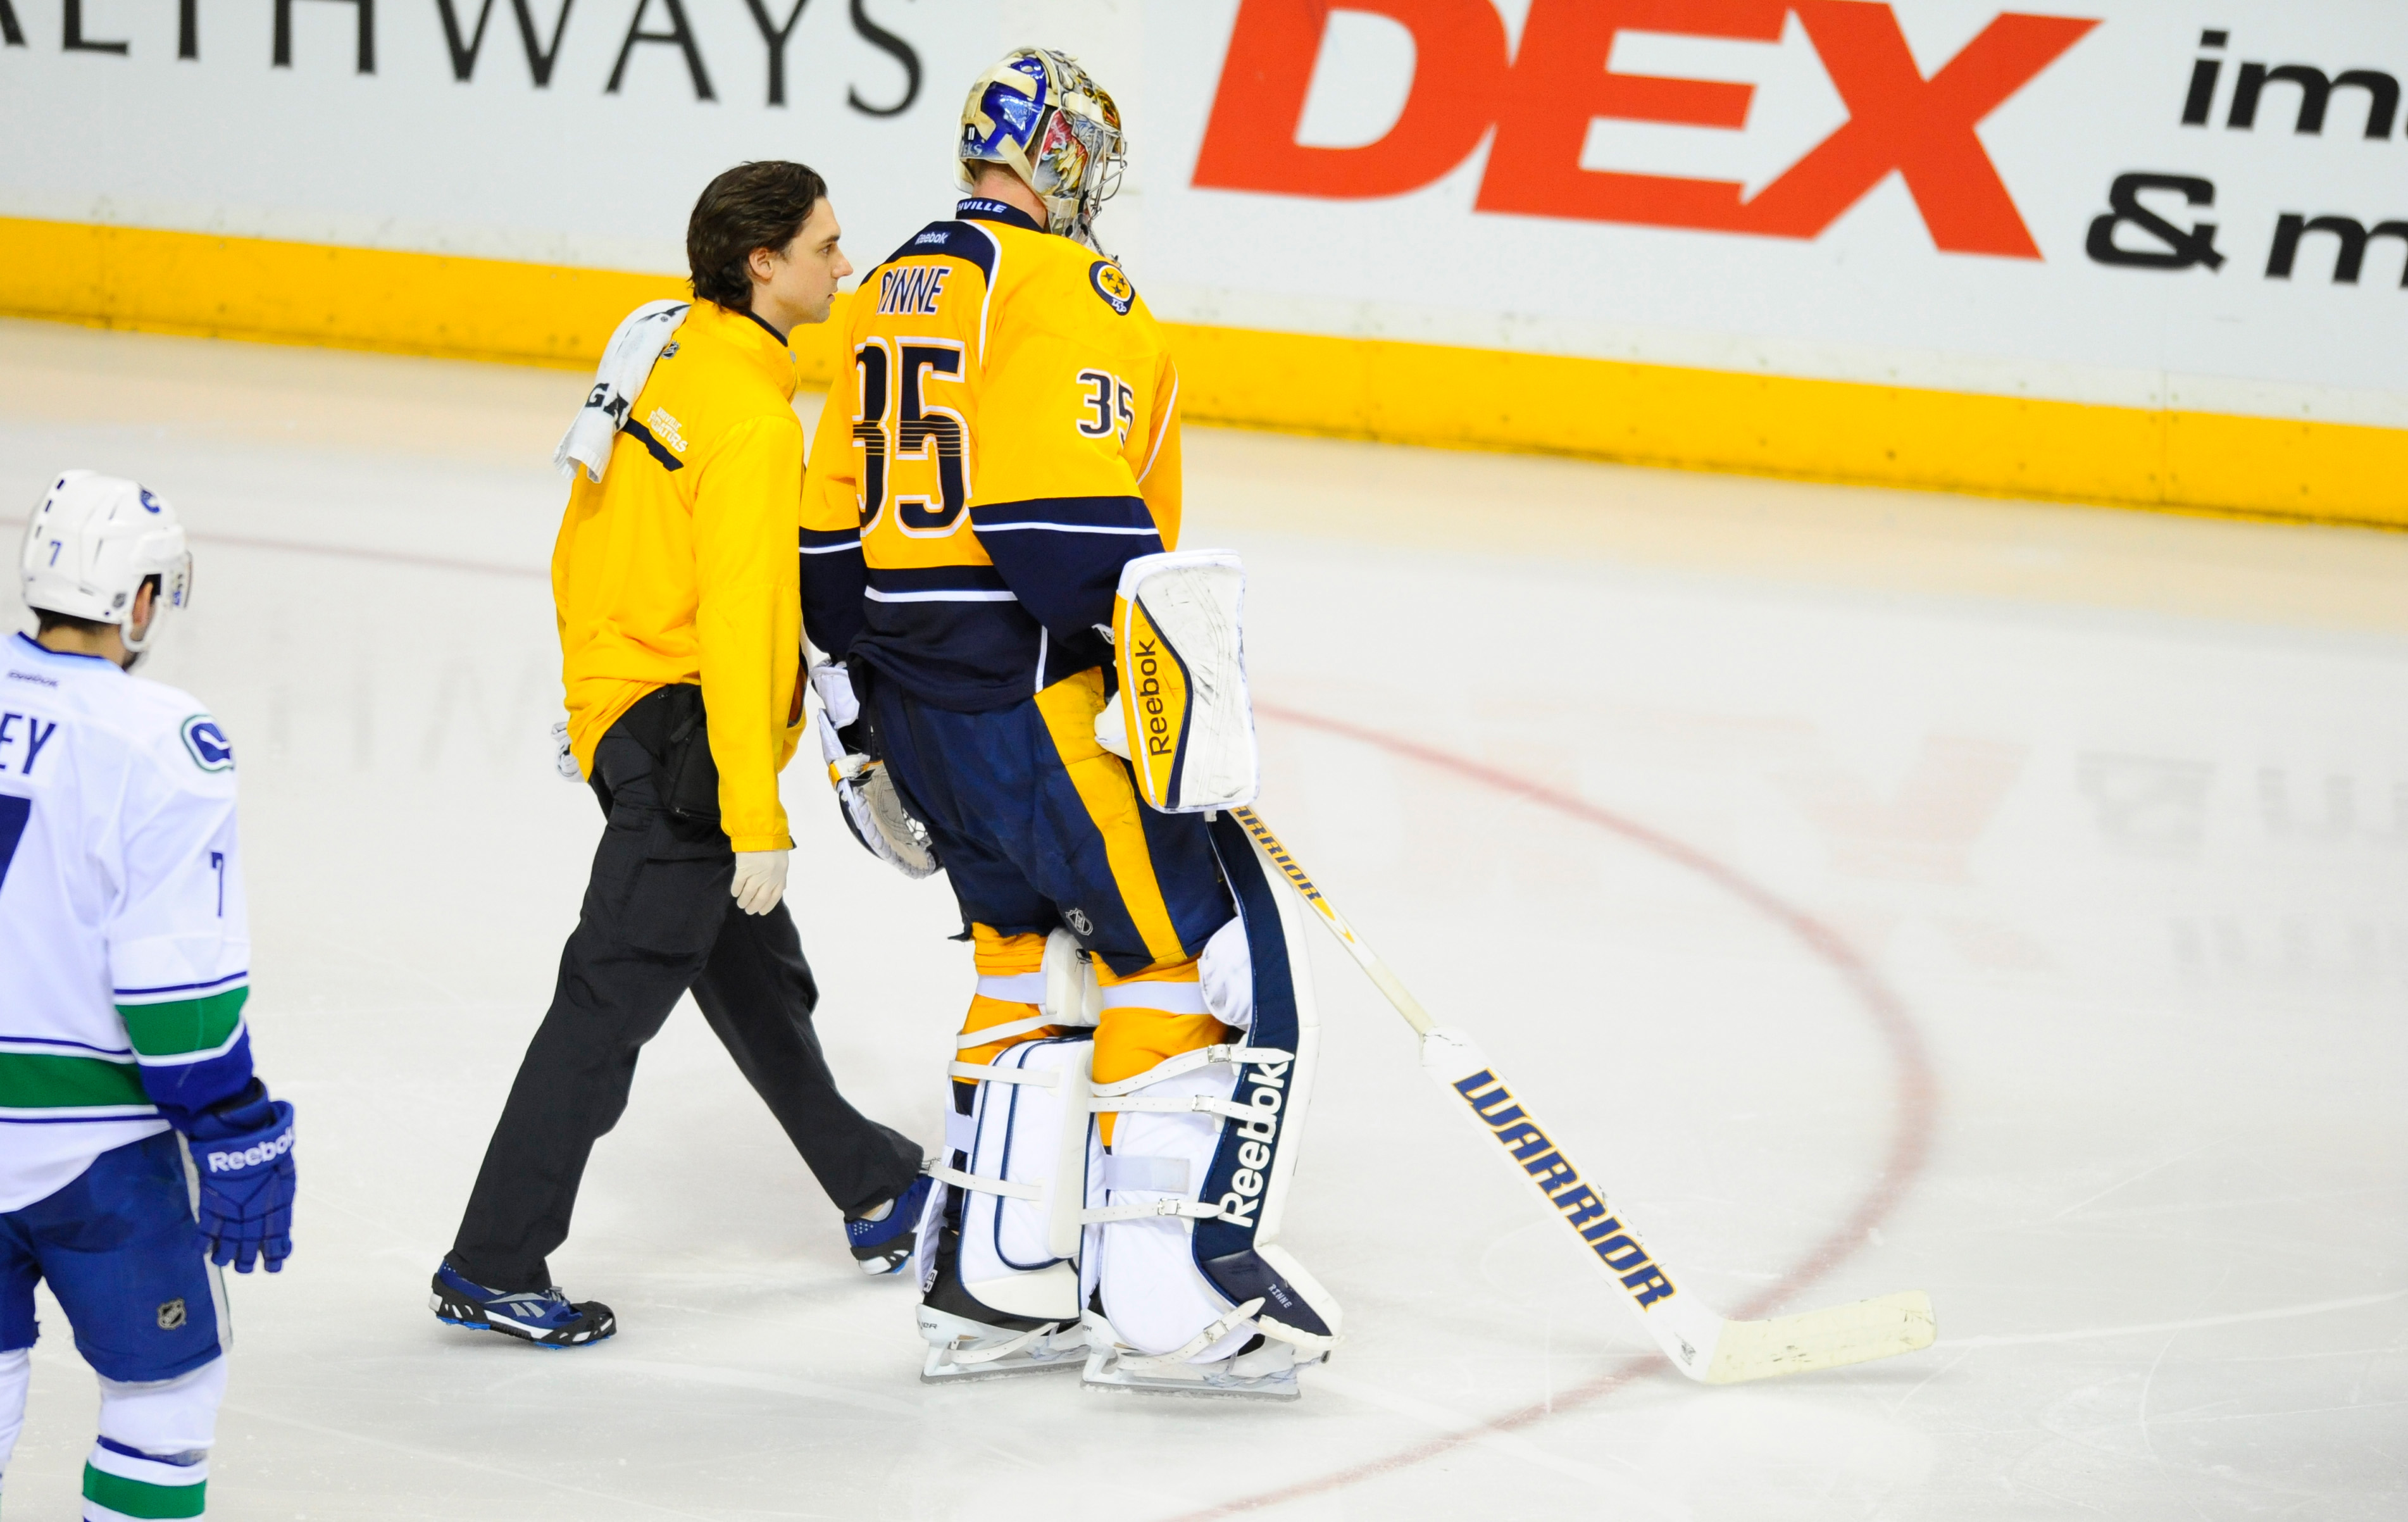 An update on Pekka Rinne is expected on Tuesday. (Christopher Hanewinckel, USA TODAY Sports)